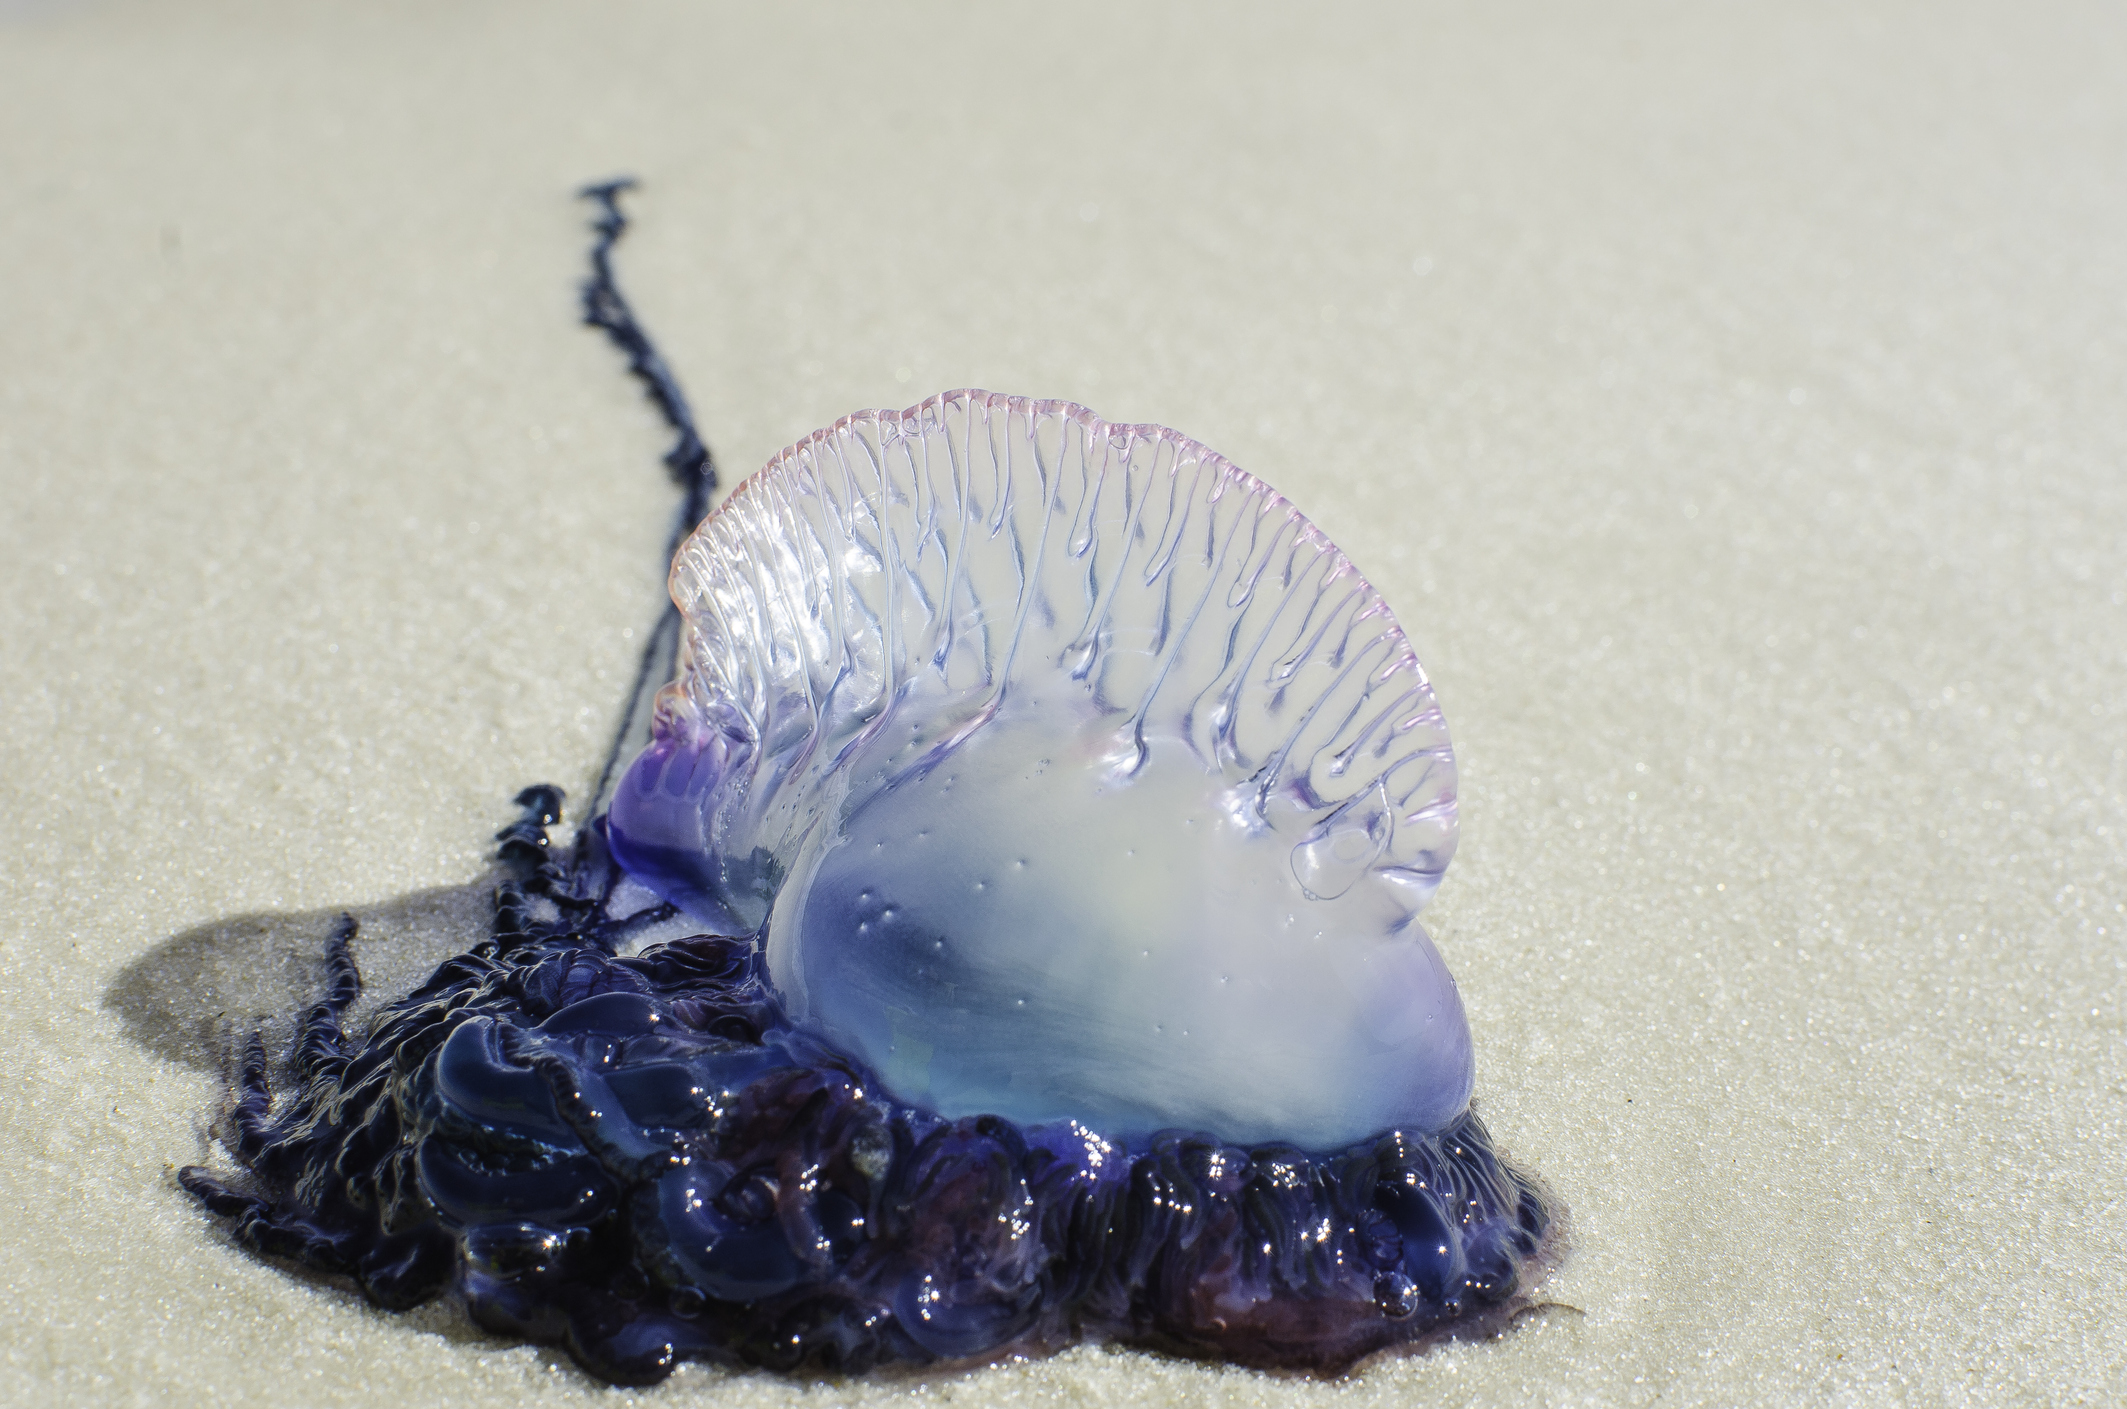 Beachgoers Urged To Stay Away From Stinging Portuguese Man-Of-War